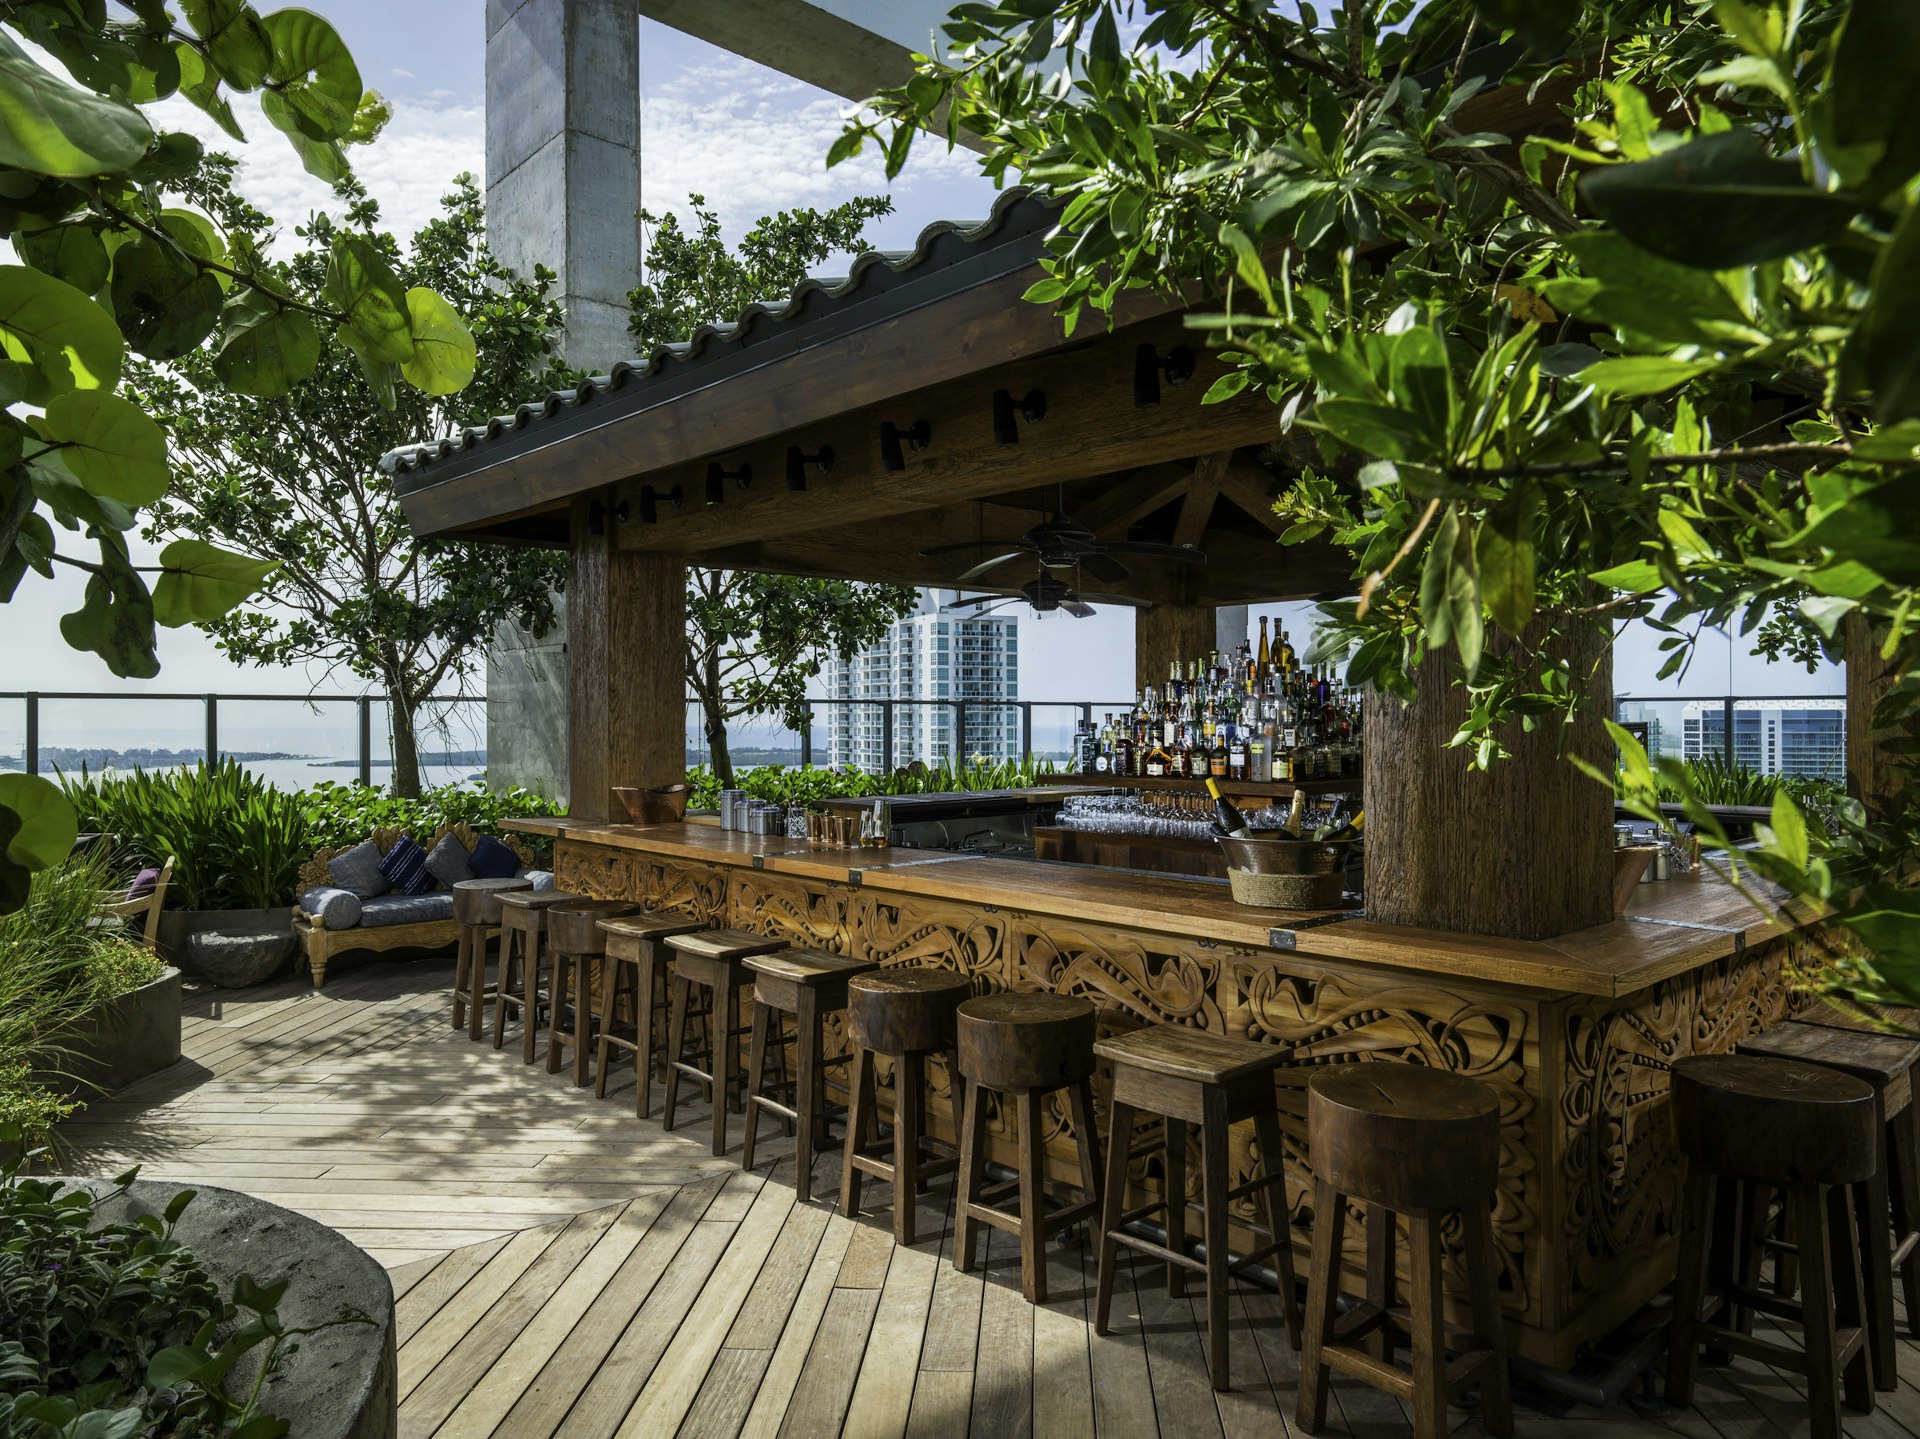 A rooftop bar scene; in the centre there's a huge covered bar, with intricate wood-carvings and wooden bar stools lining it, and the area is decorated with lush greenery. Part of the Miami skyline is visible beyond glass railings.